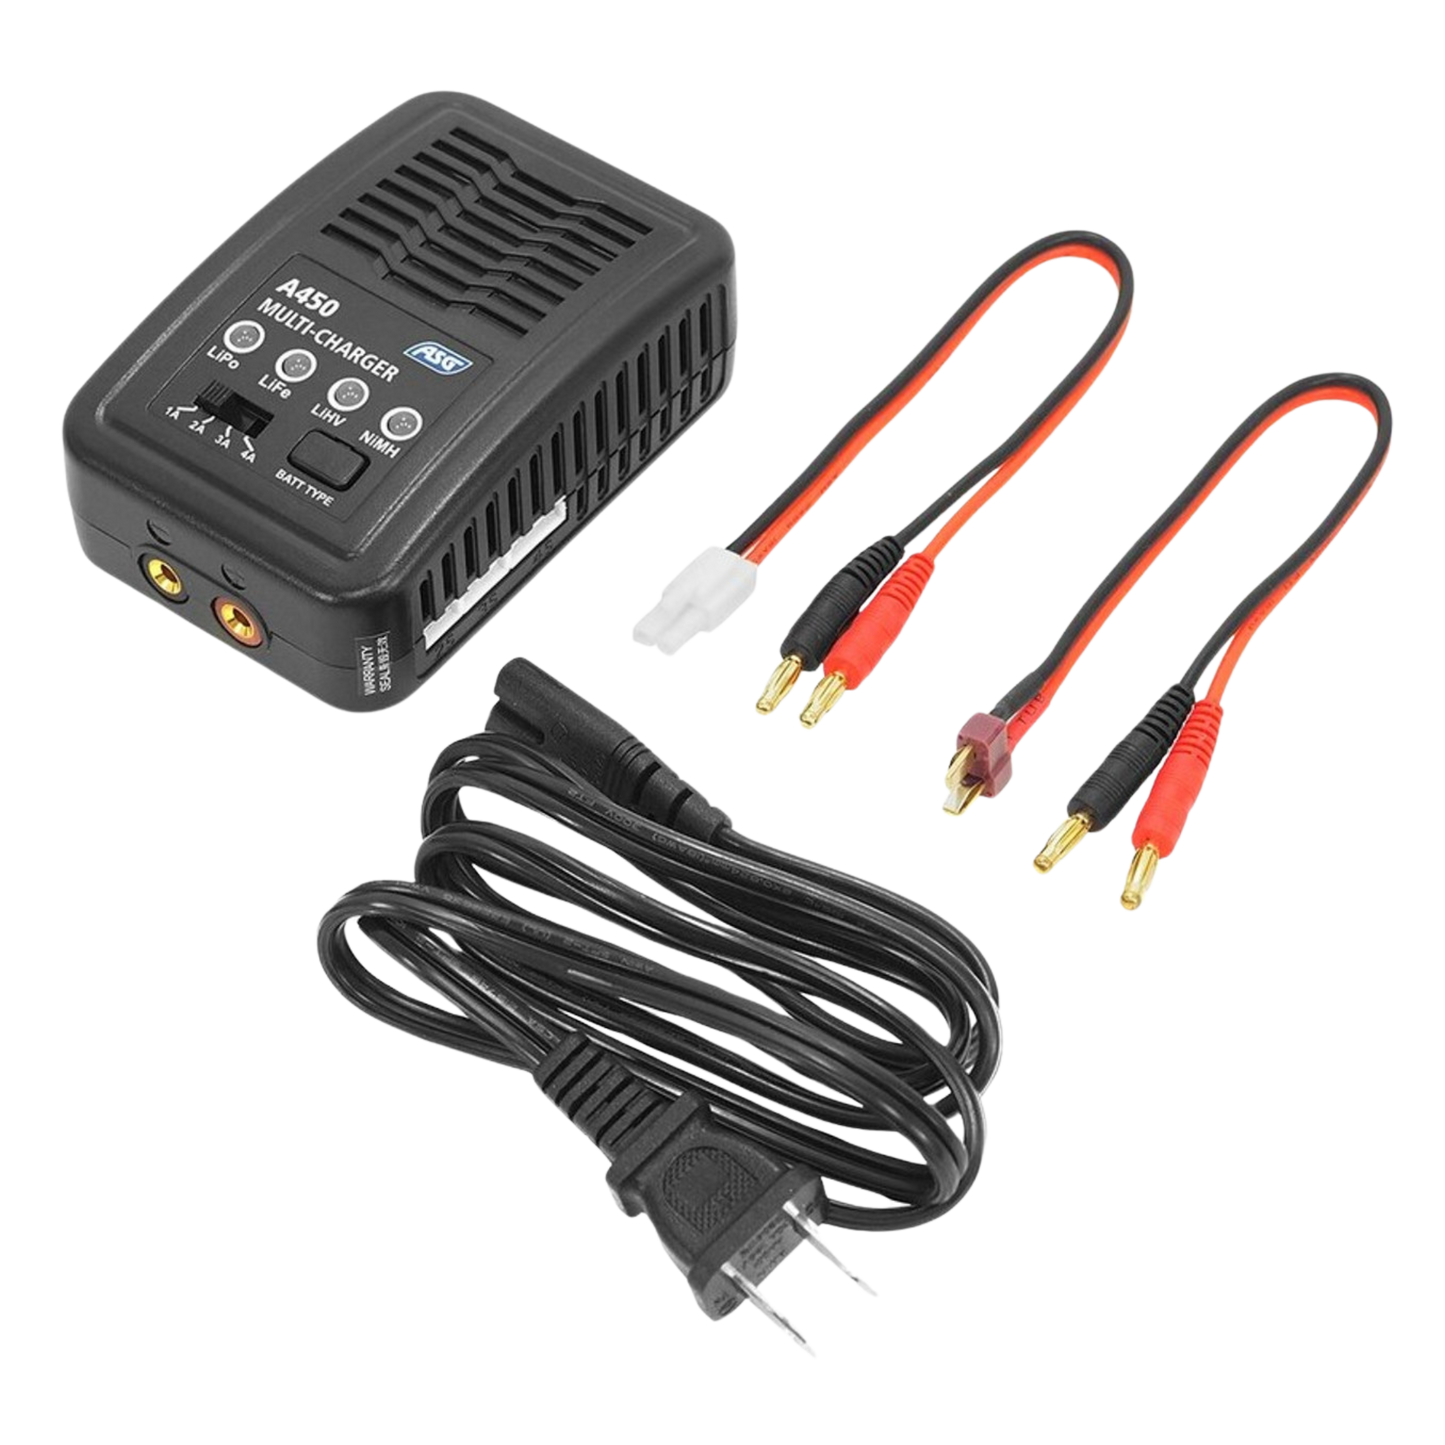 ASG A450 Airsoft Multi Chemistry Charger